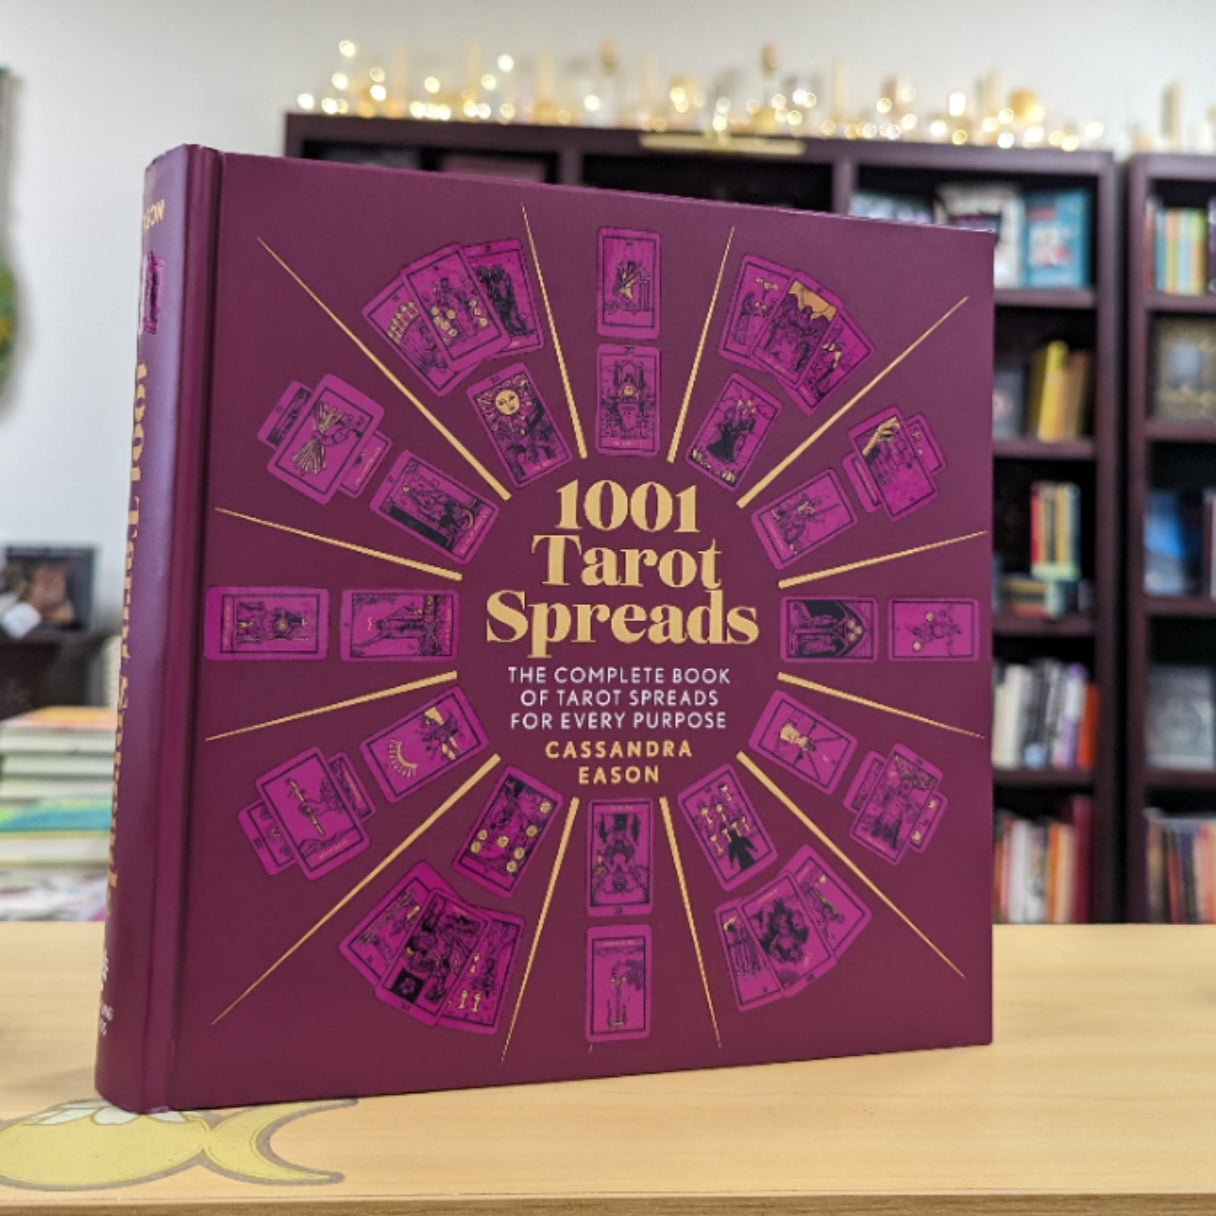 1001 Tarot Spreads: The Complete Book of Tarot Spreads for Every Purpose (1001 Series)